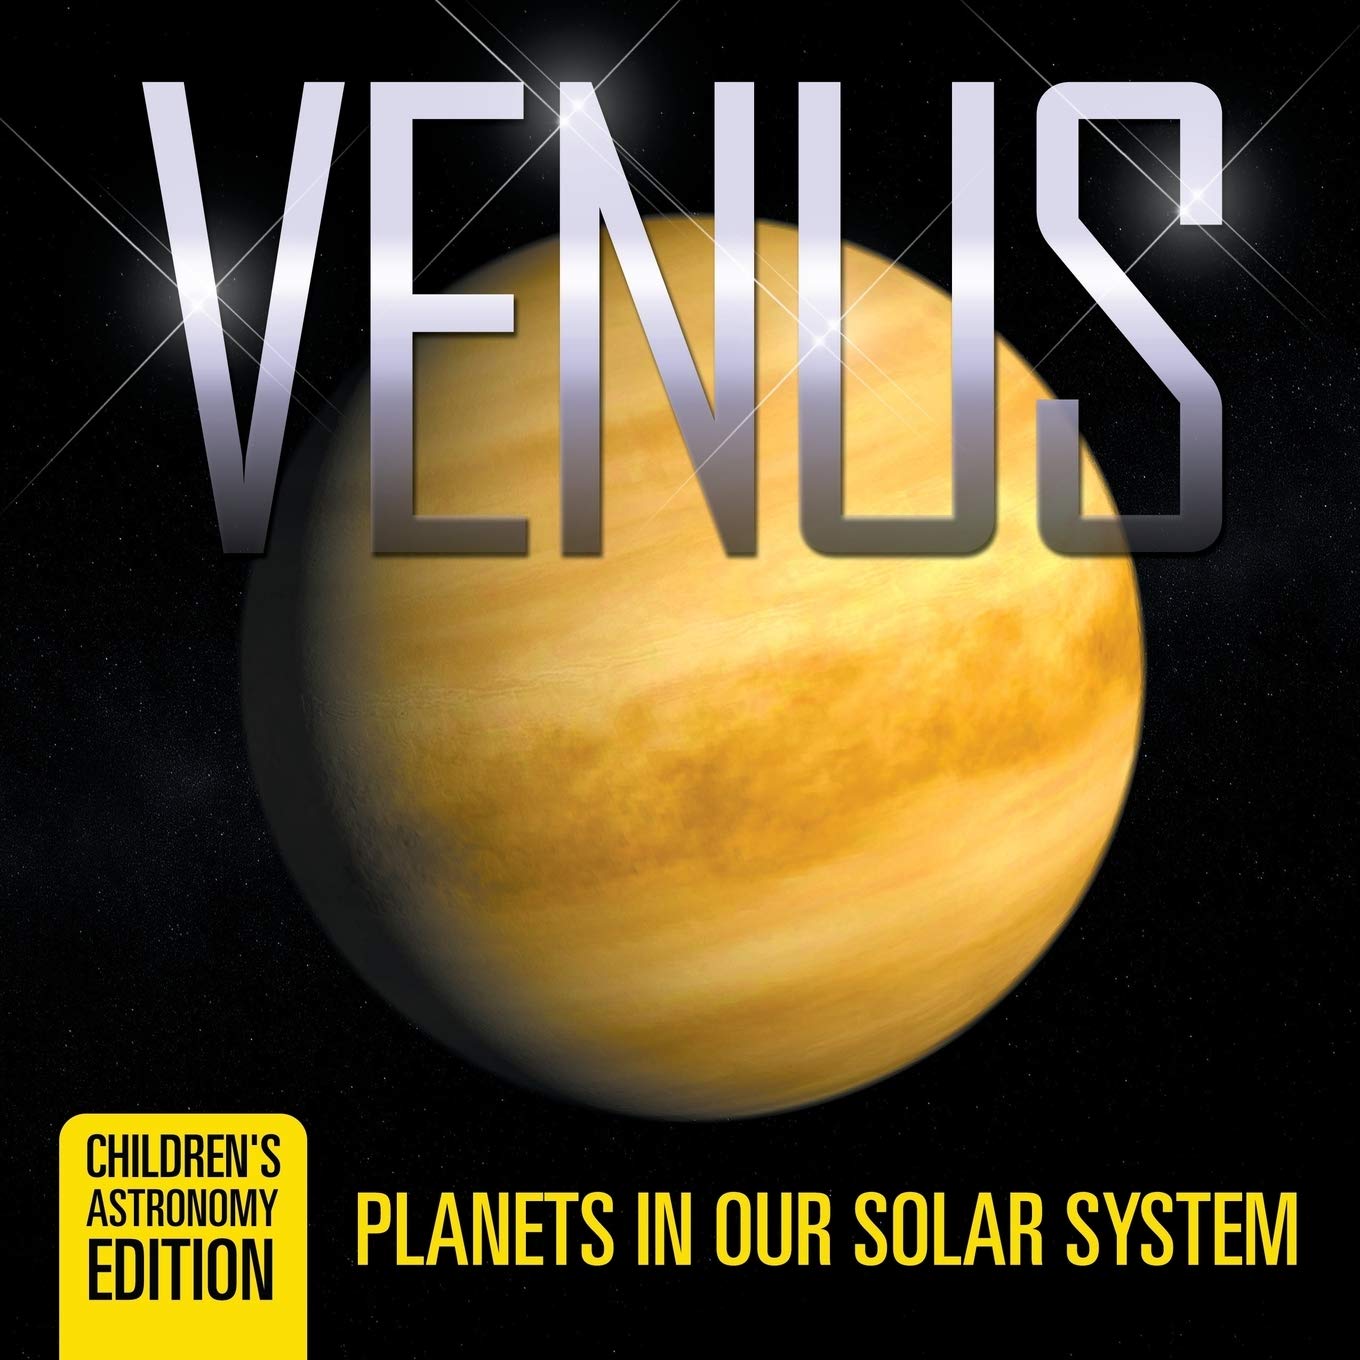 Venus: Planets in Our Solar System Children's Astronomy Edition